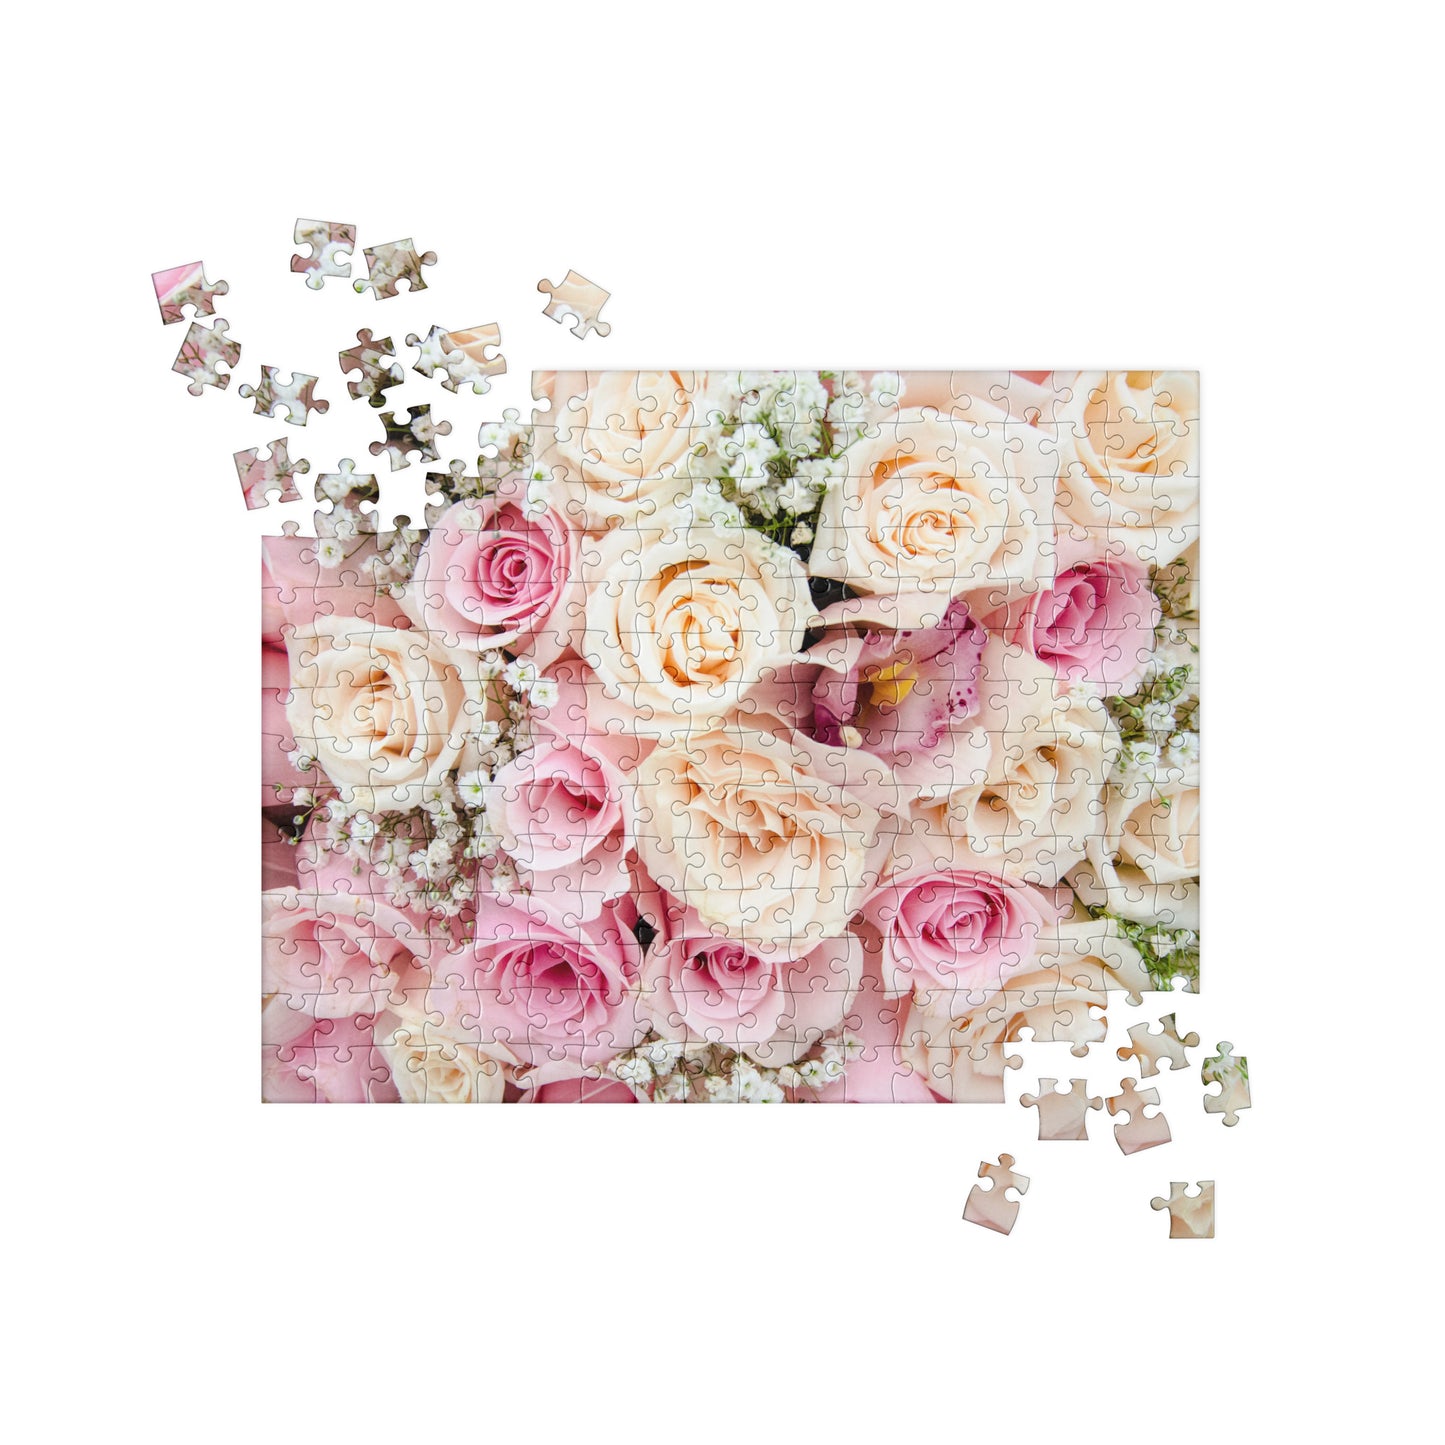 Floral Jigsaw Puzzle: Floral Bouquet with Roses